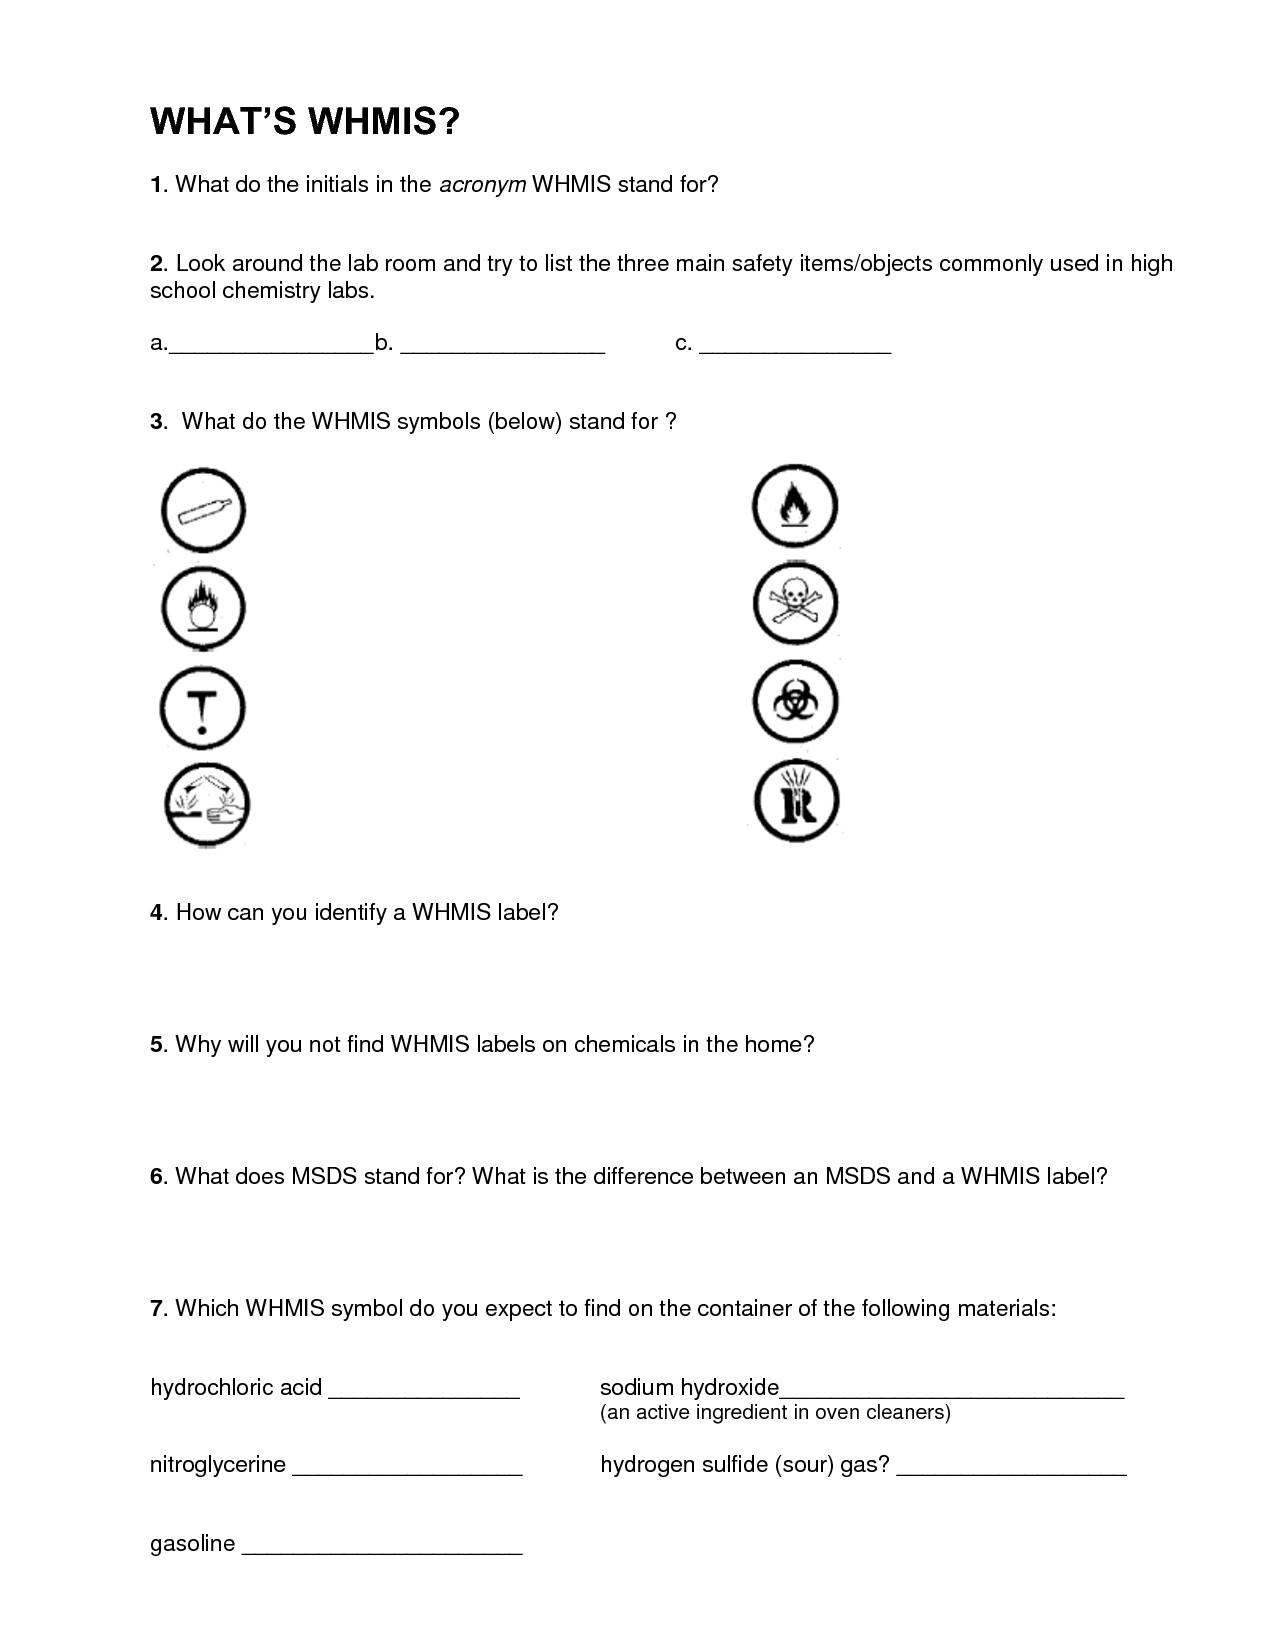 whmis-and-safety-worksheet-answer-key